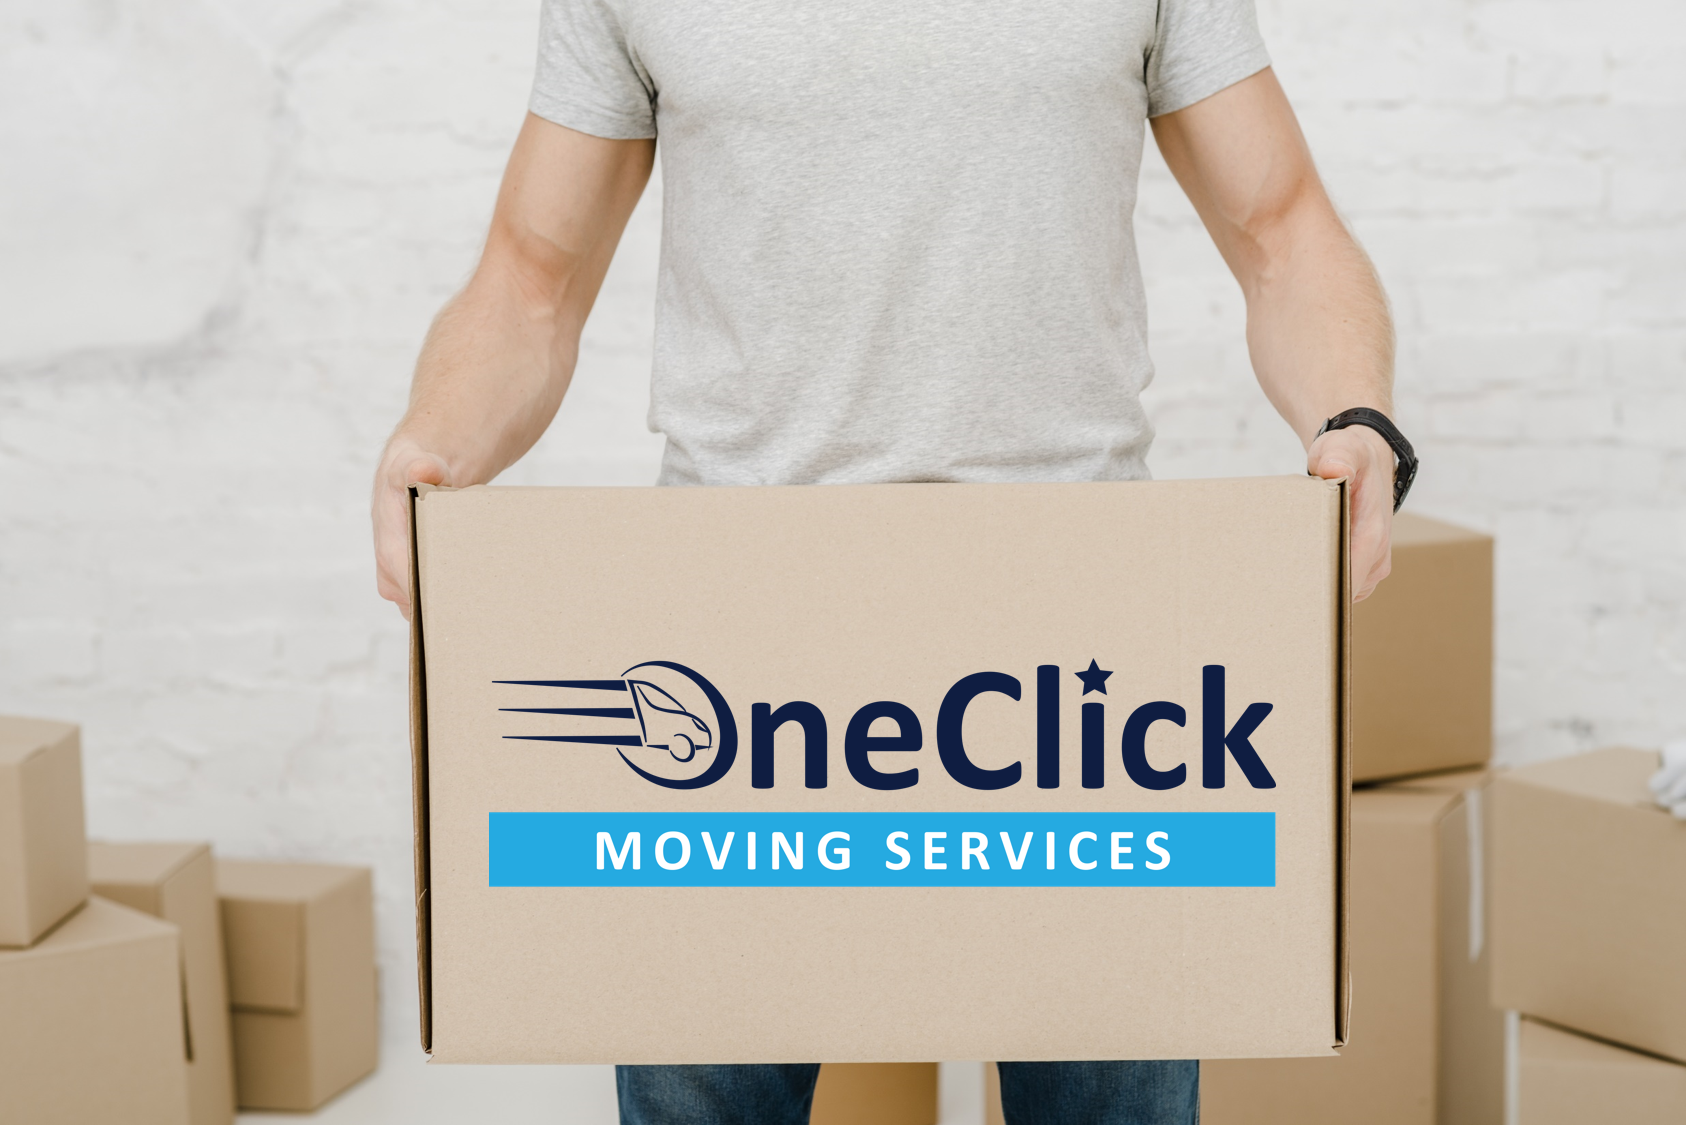 movers-near-me-movers-local-movers-moving-company-best-movers-affordable-movers-movers-oneclick-movers-california-moving-services-moving-services-near-me-residential-movers-moving-day